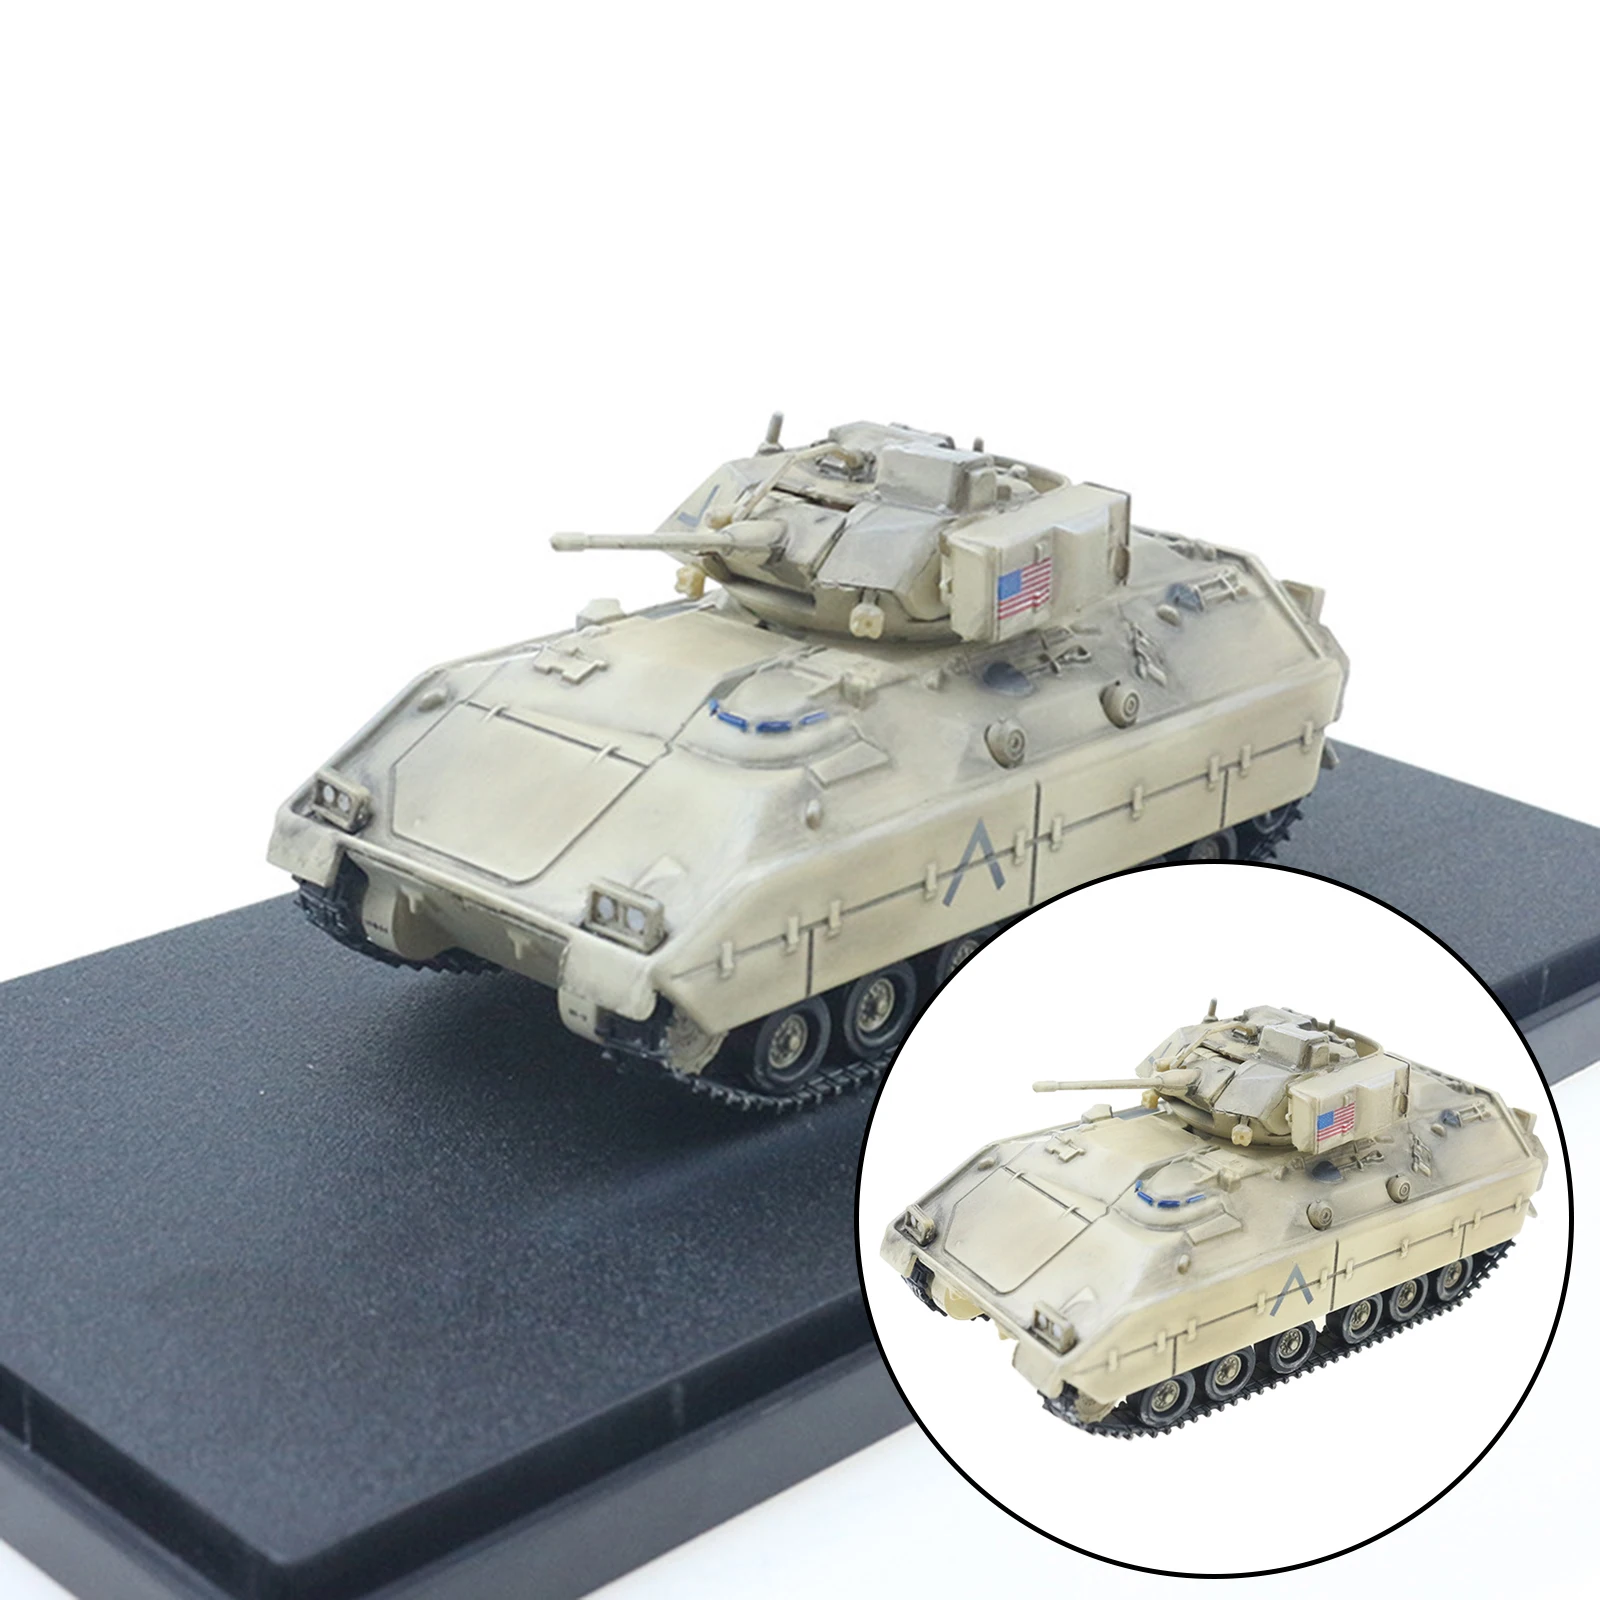 1:72 Metal 12107B M2 IFV Diecast Tank Model Alloy Adult Gifts for Boys Decorations